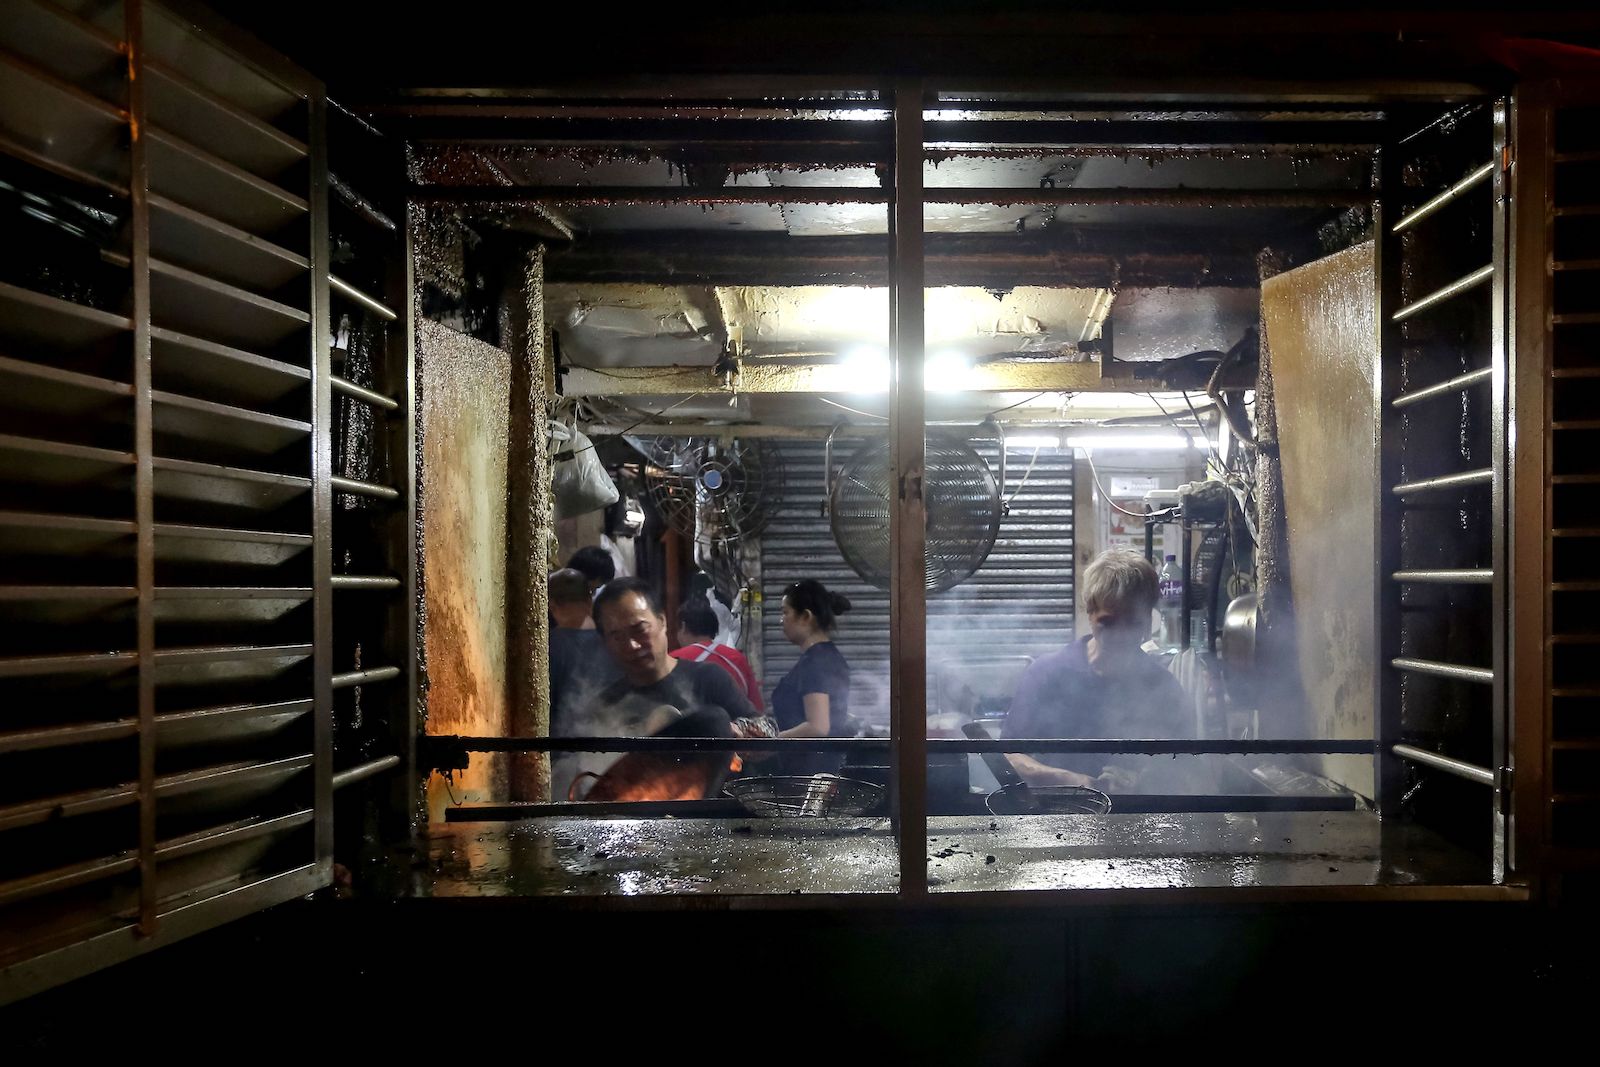 a person cooks over a hot stove in an open-air restaurant